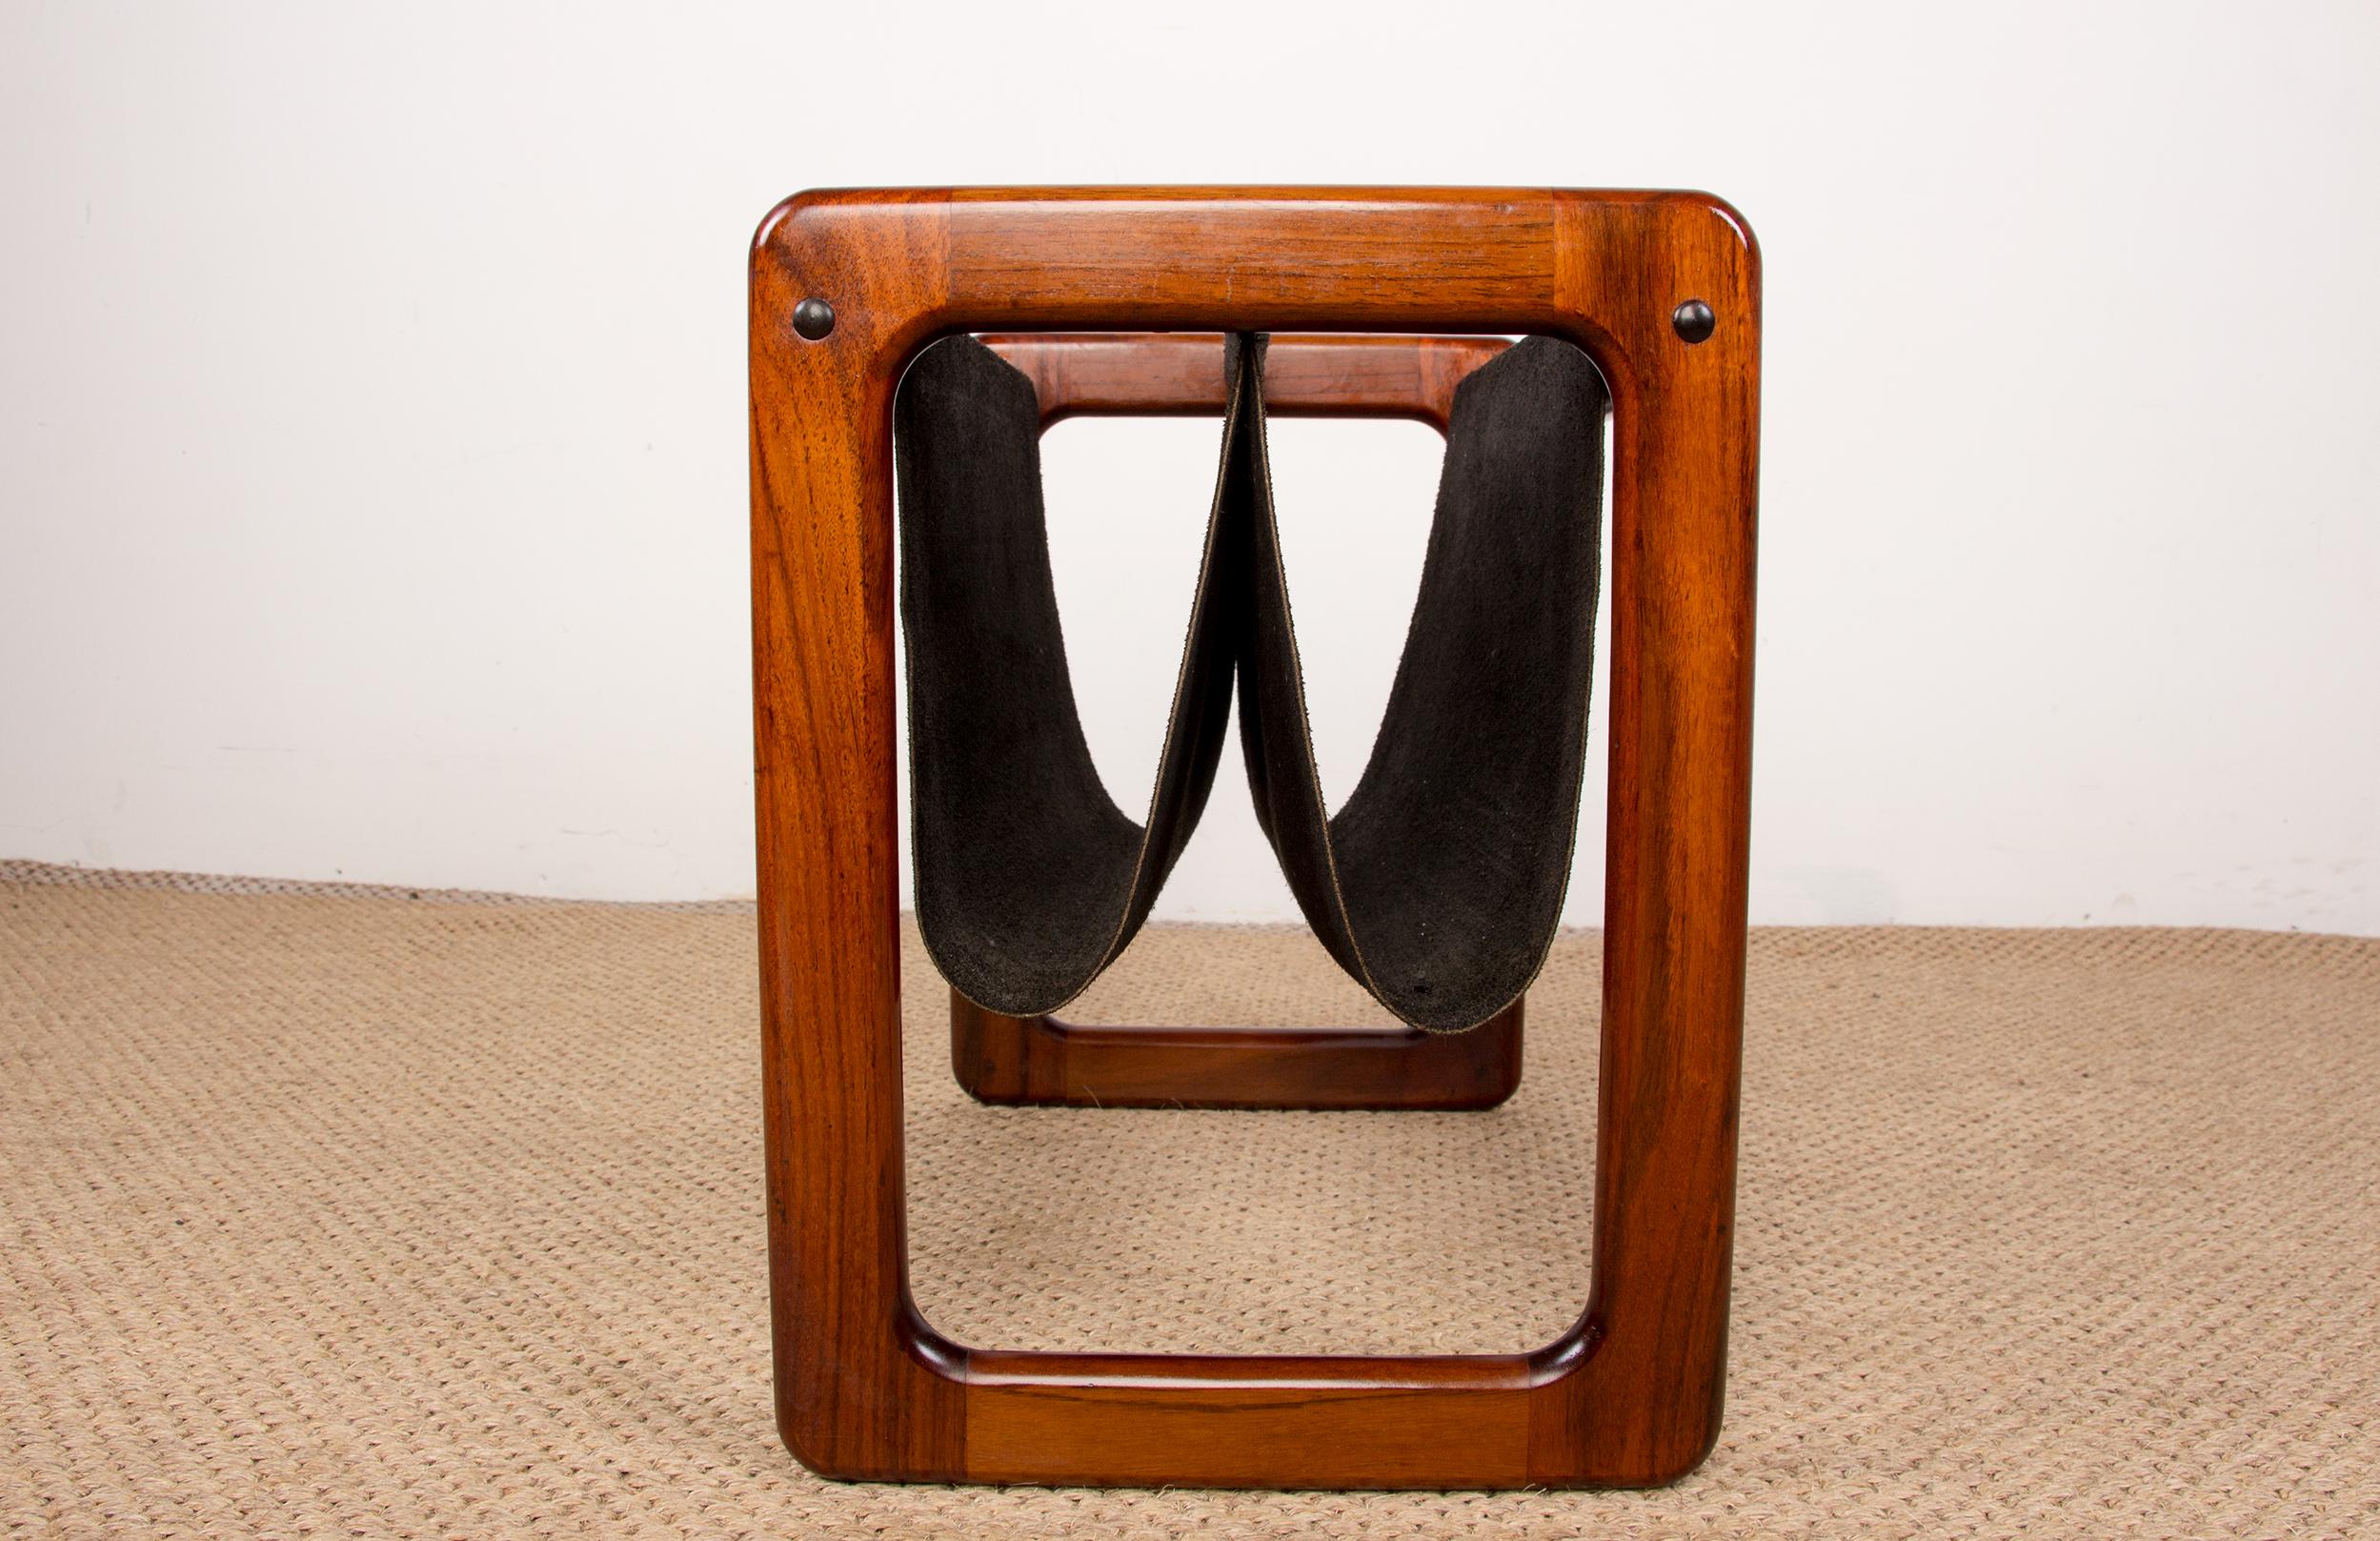 Mid-20th Century Danish Rosewood and Leather Magazine Rack by Kai Kristiansen for Odder Furniture